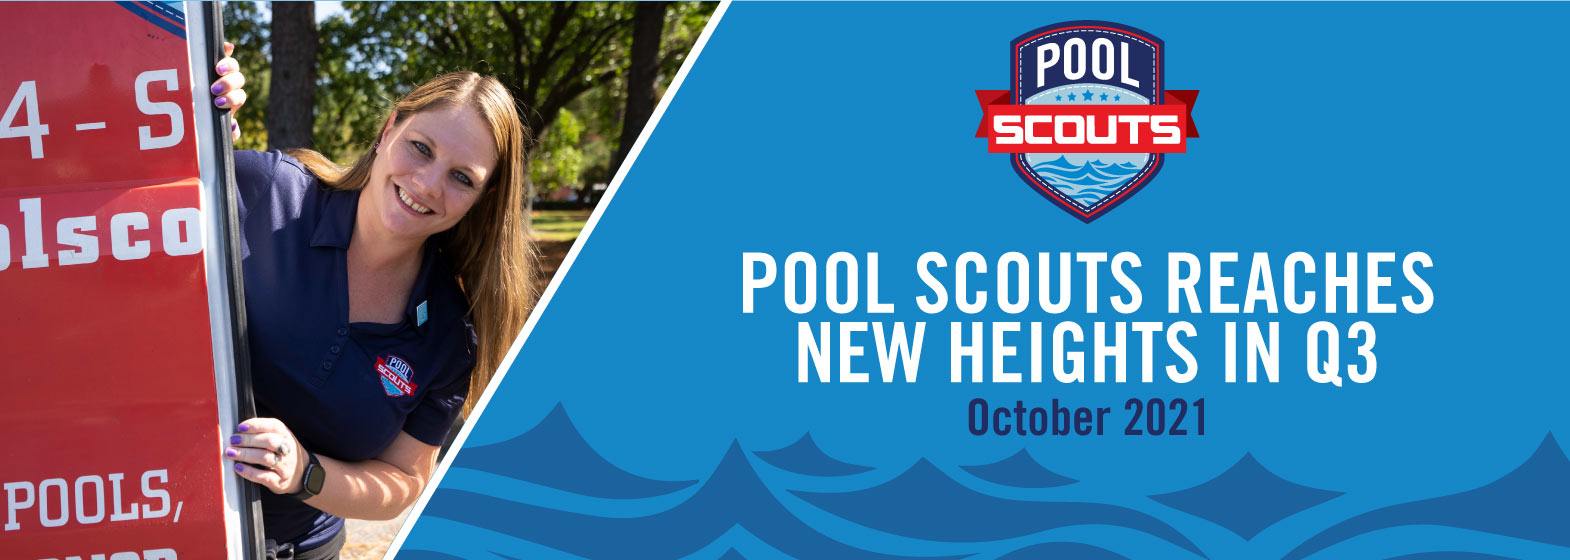 Image of Pool Scouts Reaches New Heights in Q3